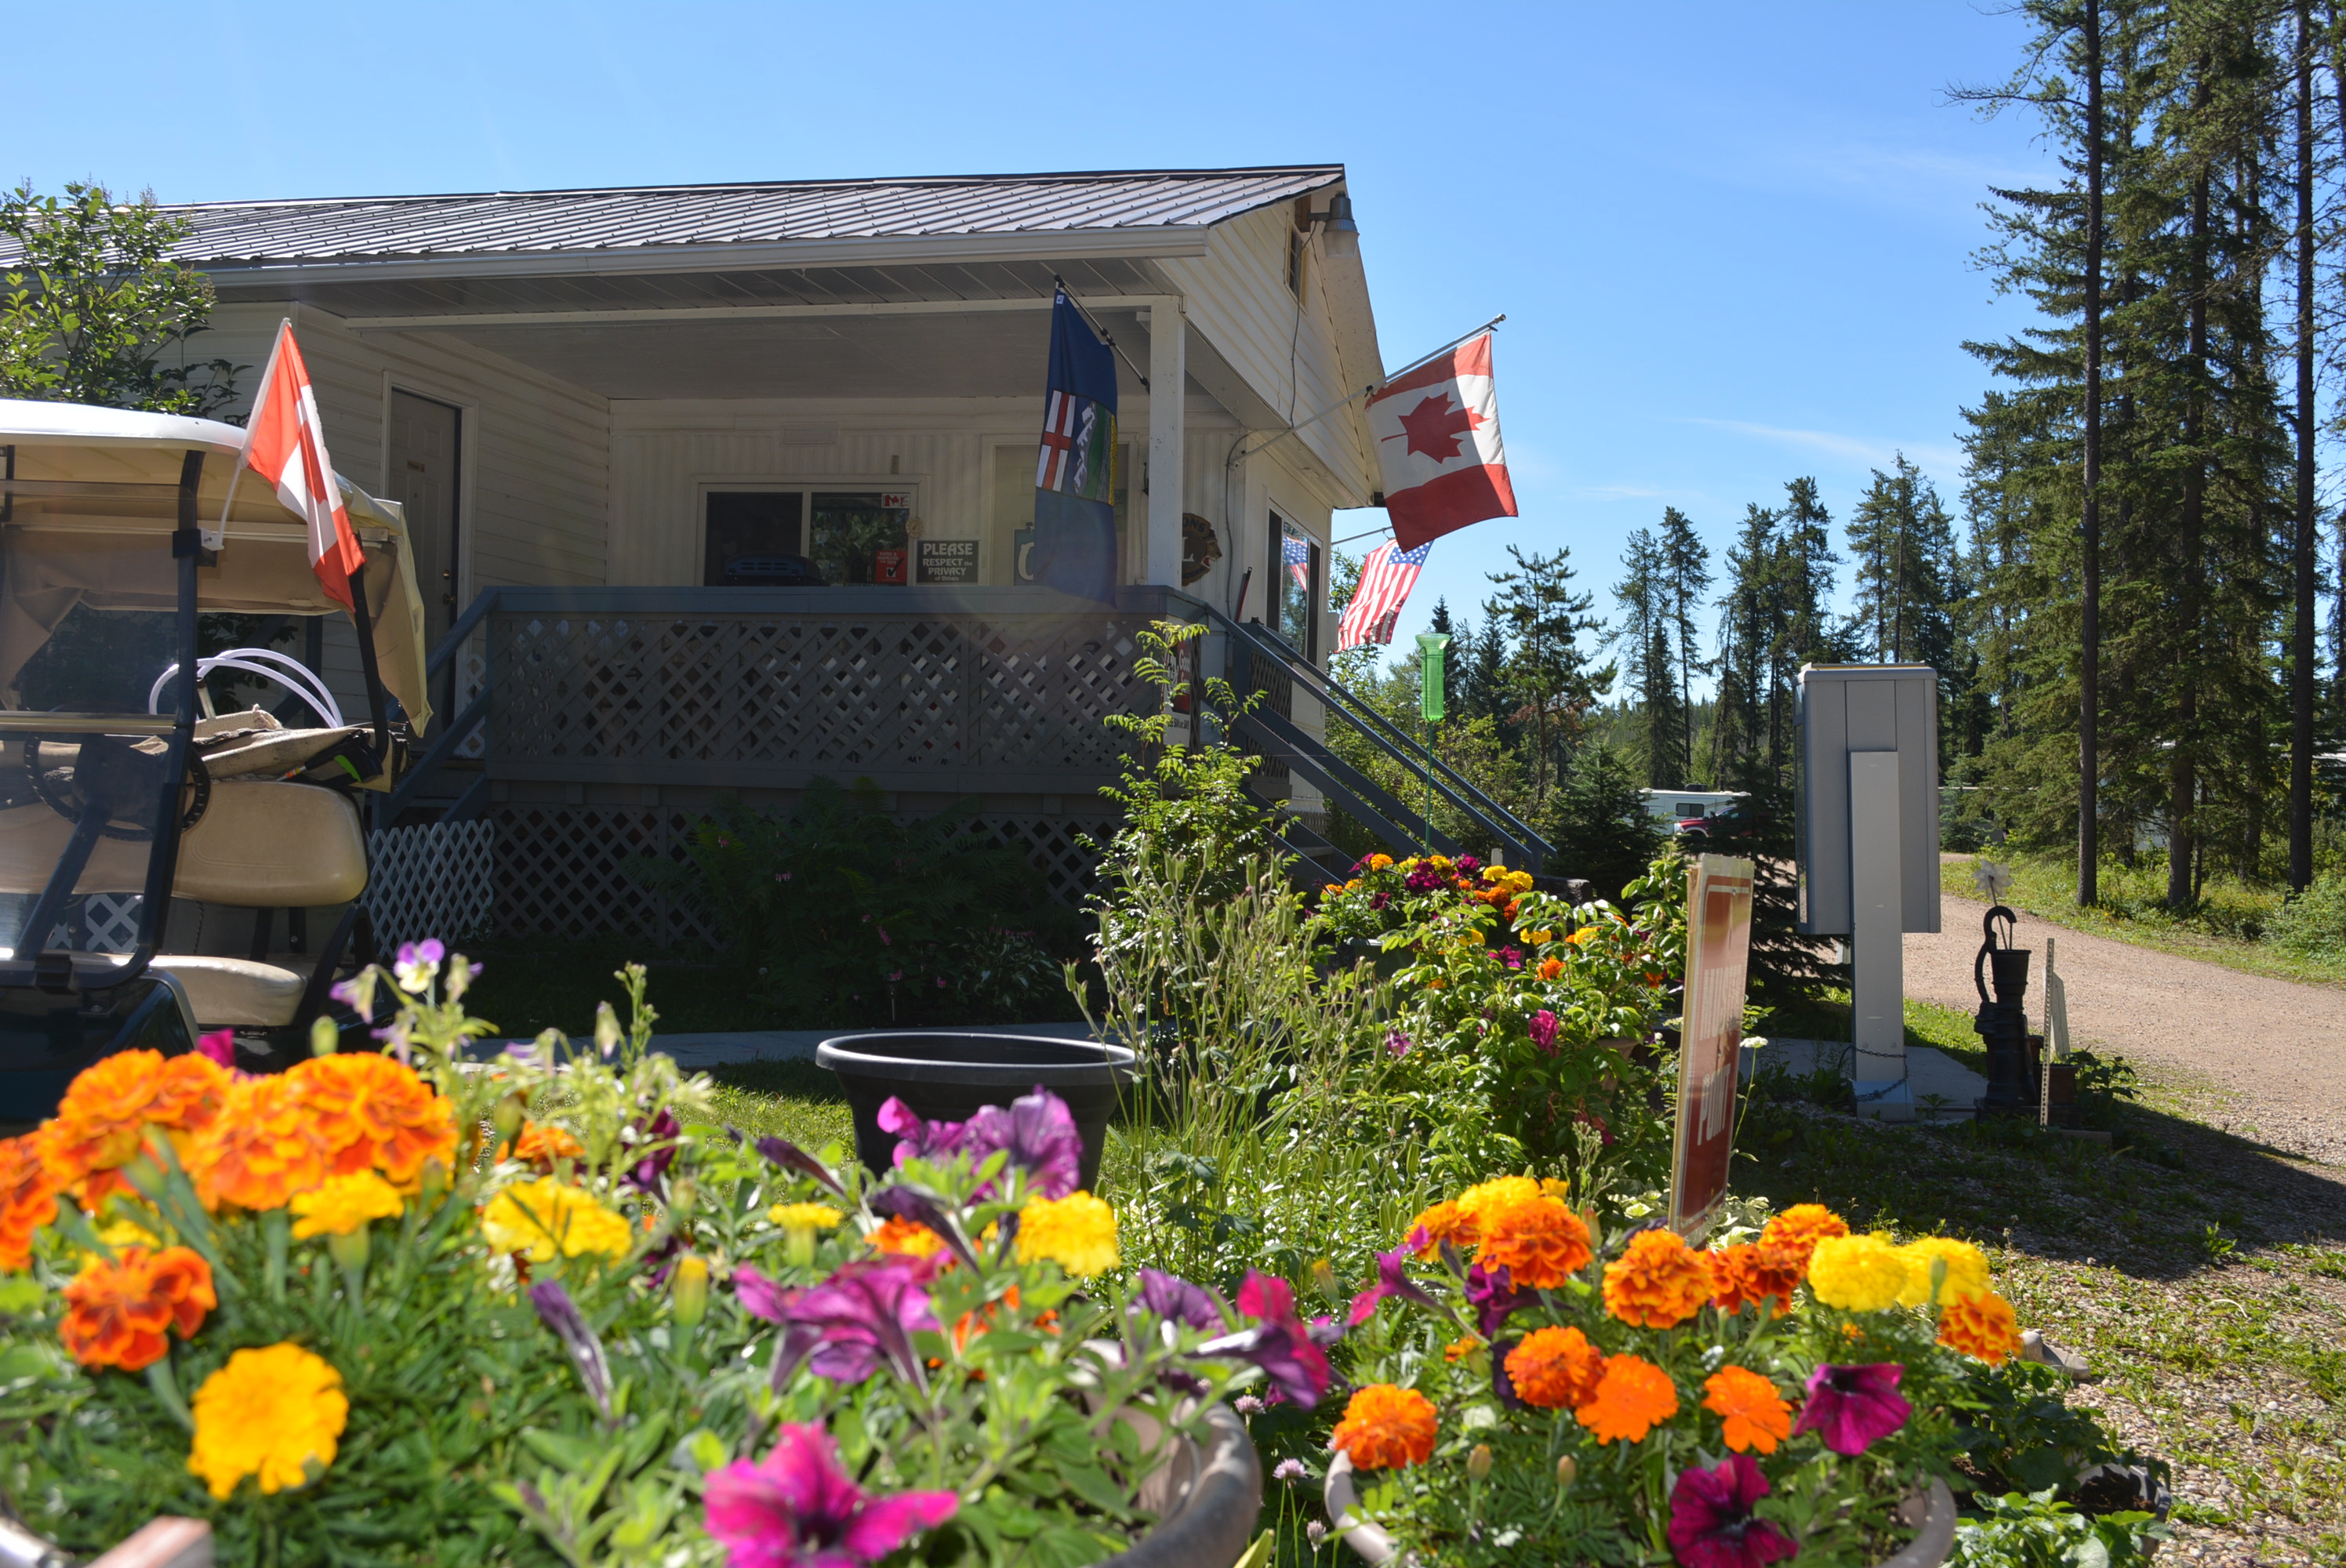 Welcome to the Whitecourt Lions Campground! Your Home Away from Home.